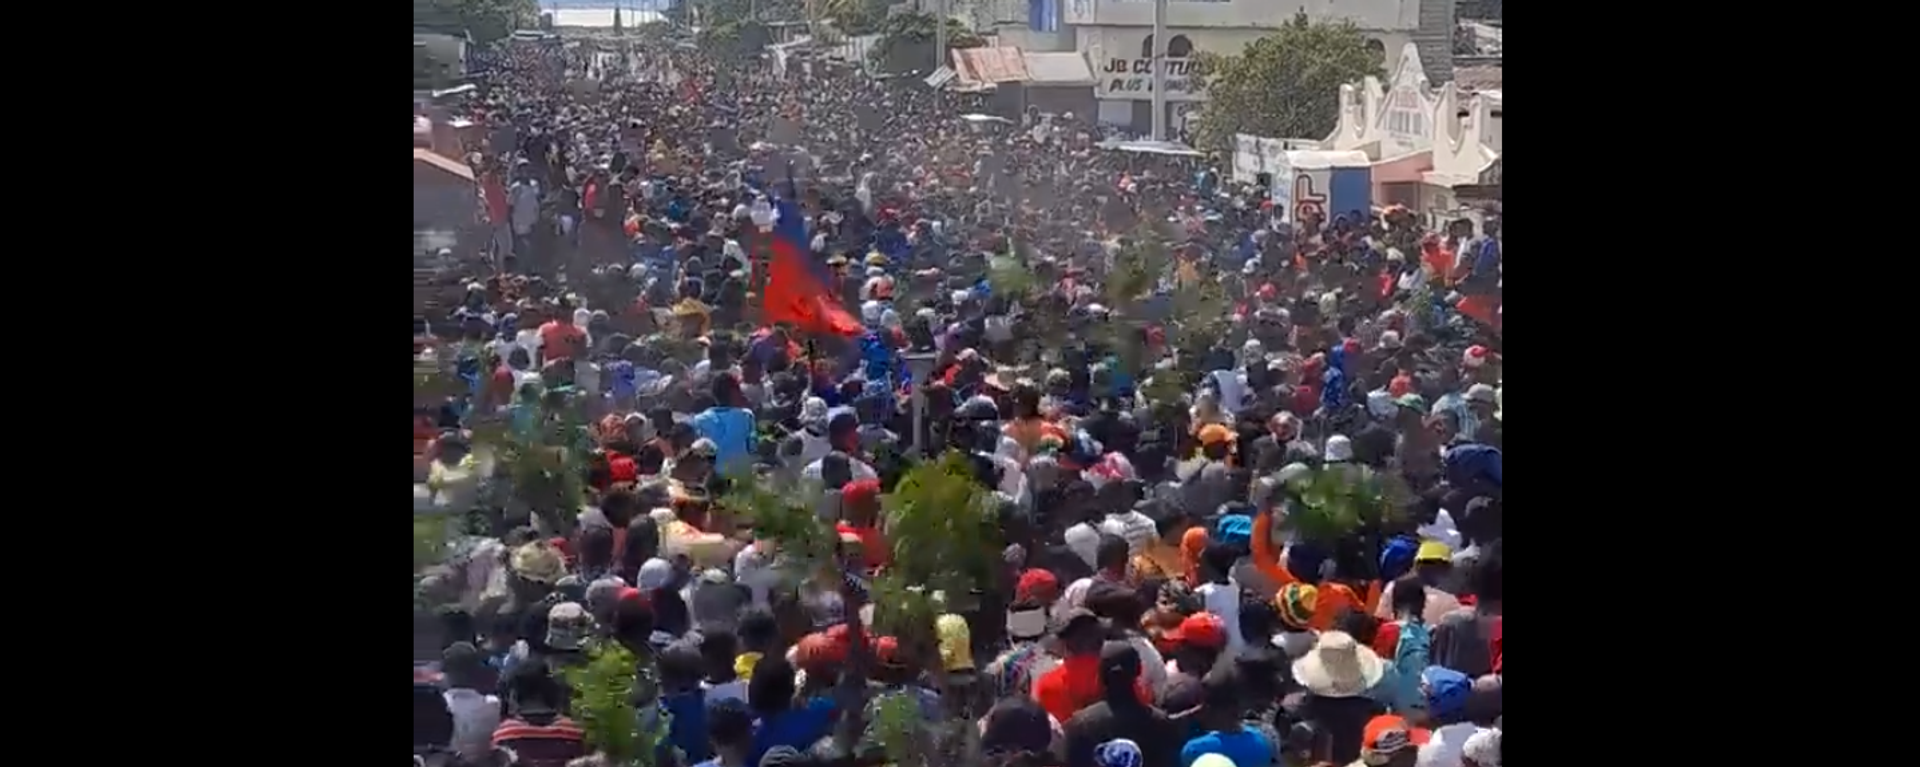 Thousands of demonstrators protest in the Cite Soleil neighborhood of Port-au-Prince, Haiti, on October 12, 2022, against a possible new intervention by foreign troops. They also called for the resignation of Acting Prime Minister Ariel Henry. - Sputnik International, 1920, 27.01.2023